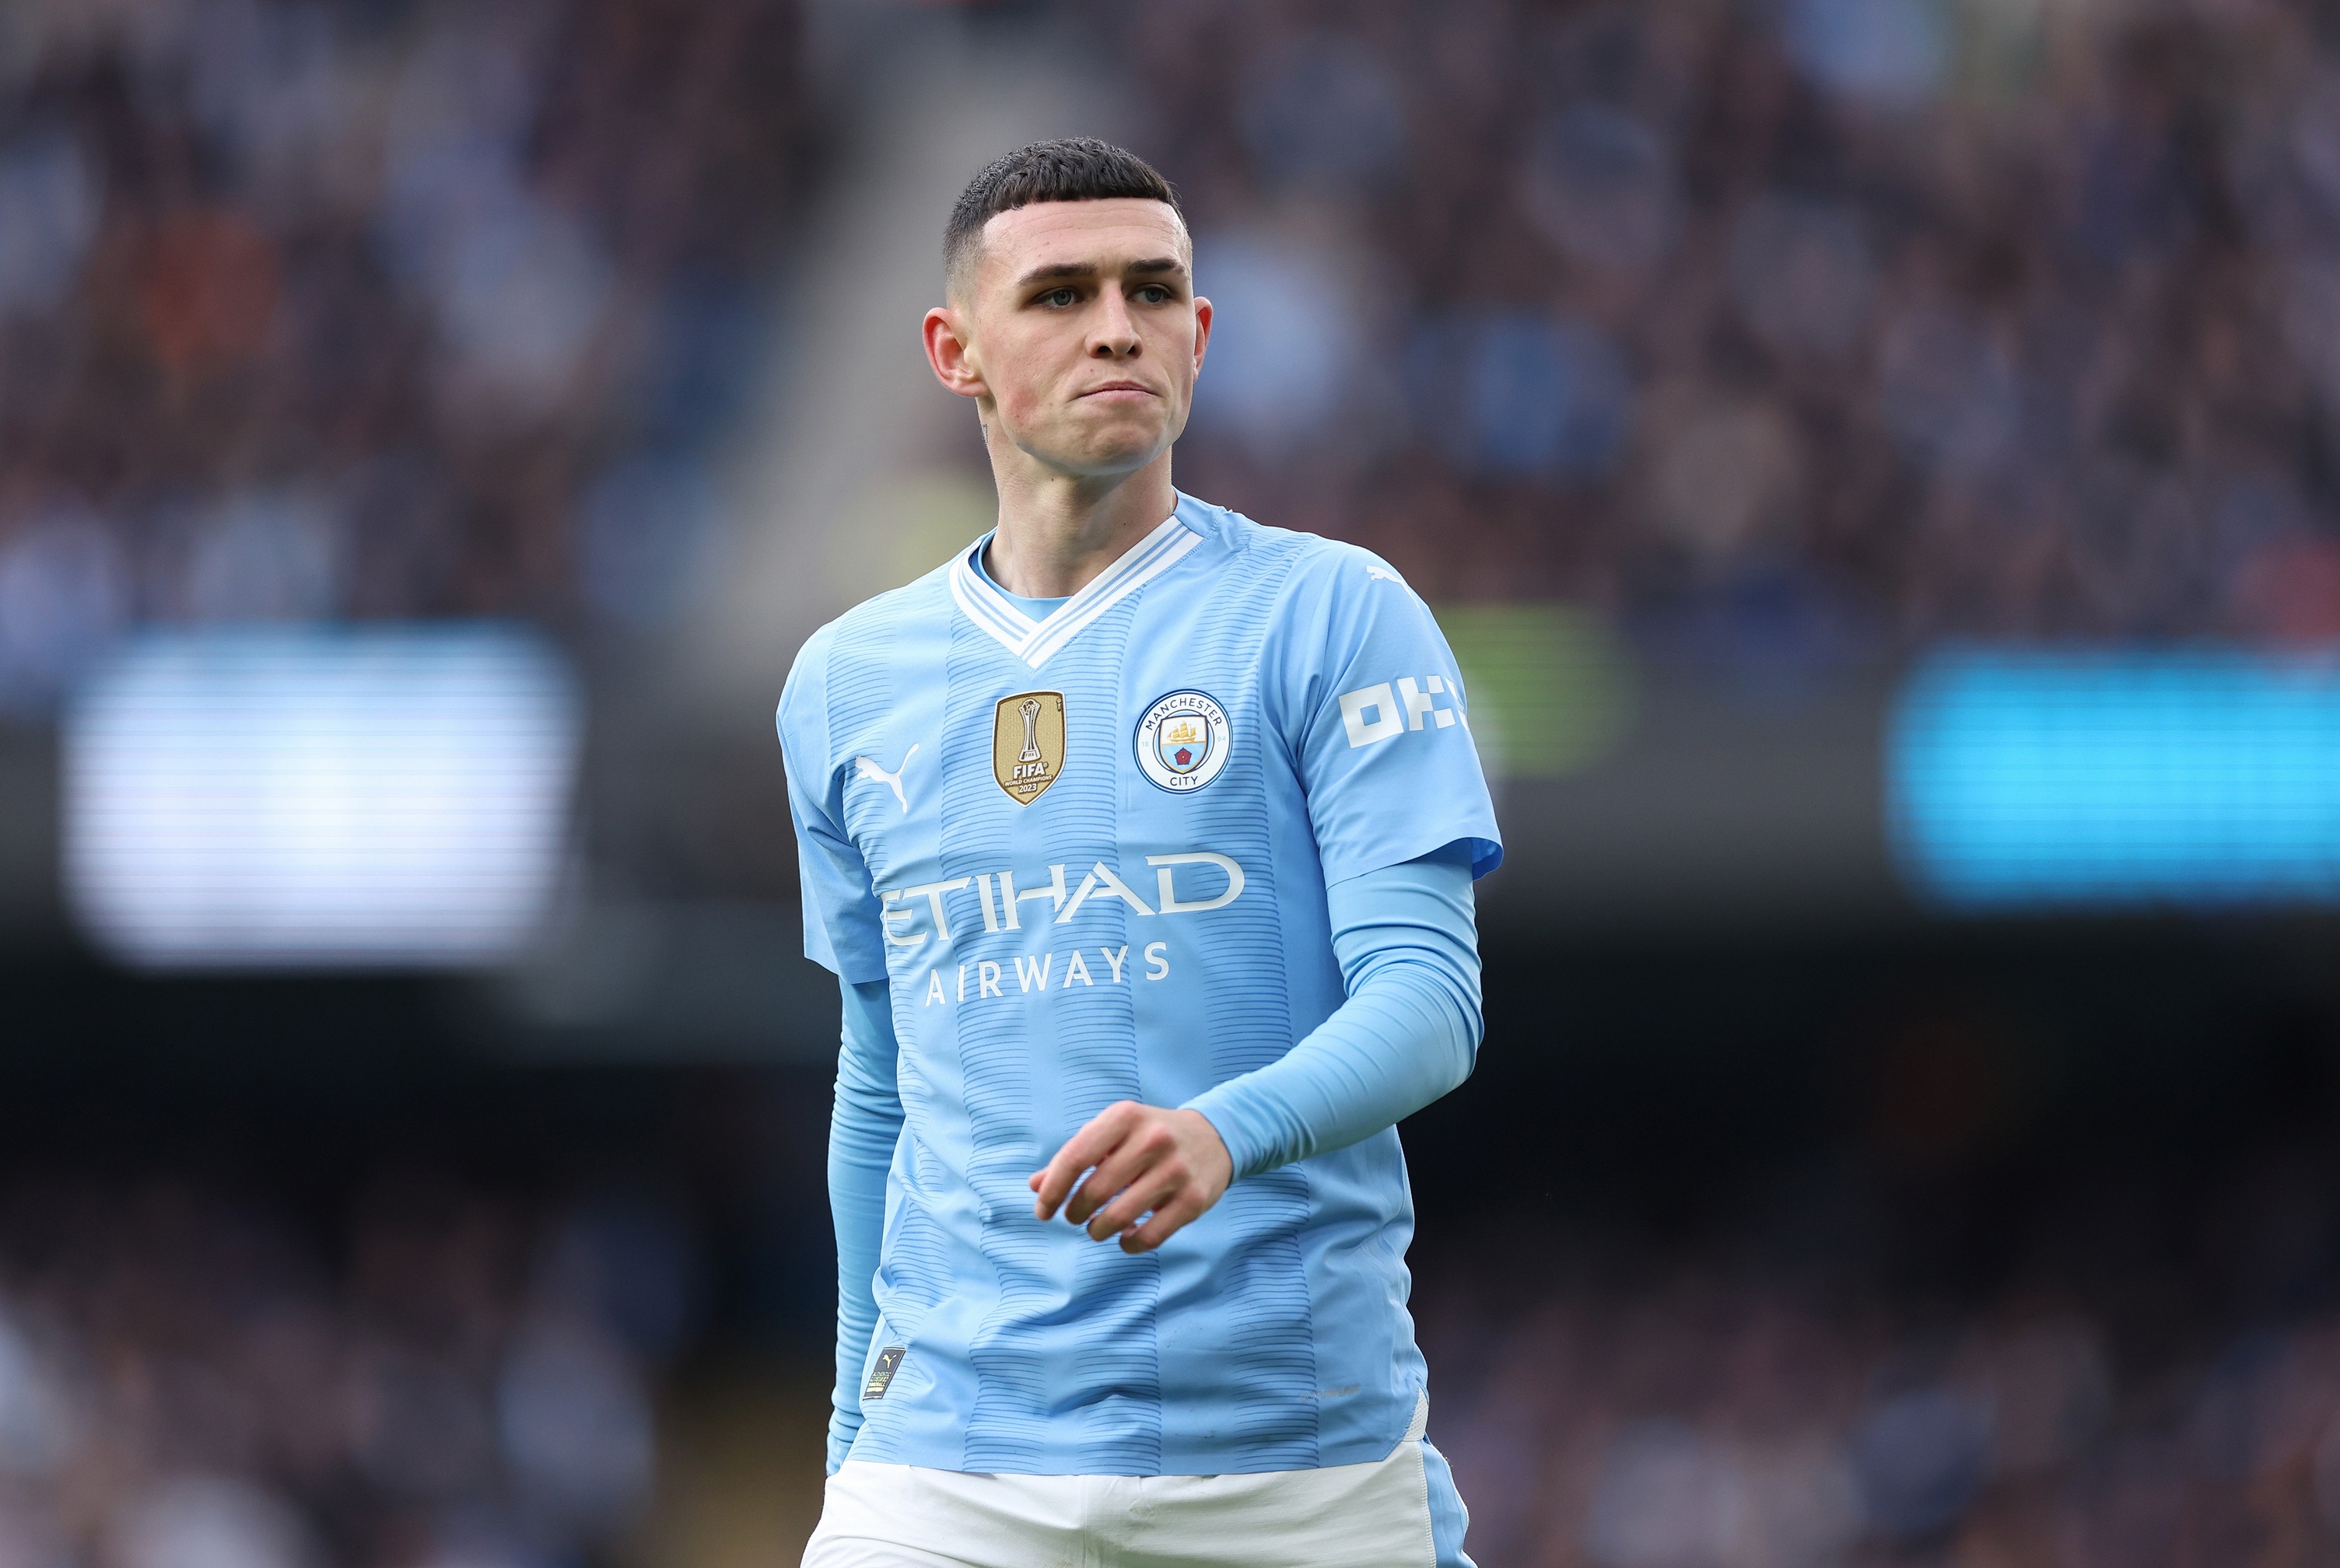 Liverpool player’s ‘masterclass’ performance vs City was so good Phil Foden paid his respects